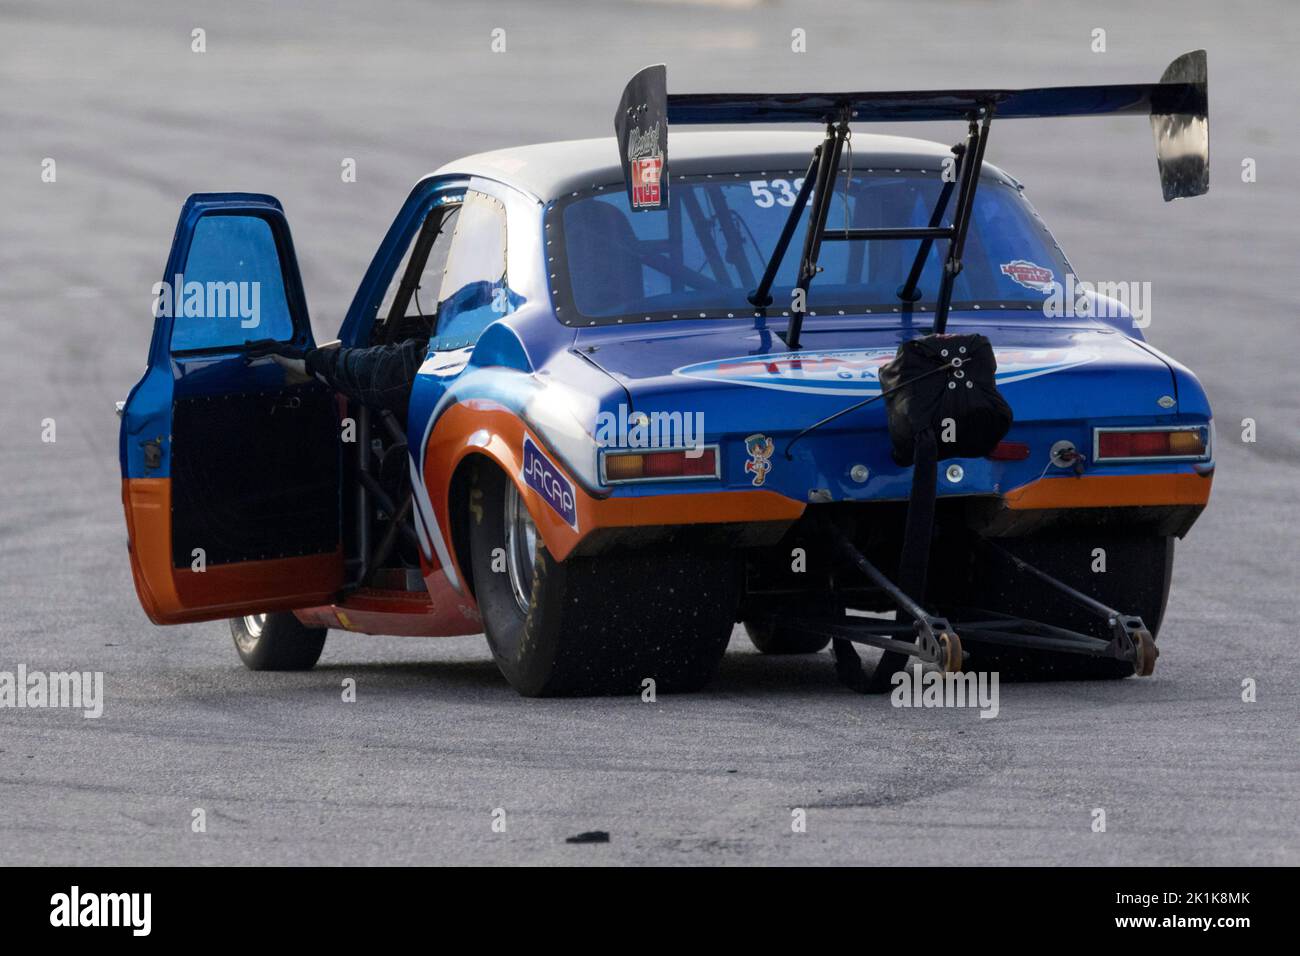 Heavily modified Ford Escort Mk I used as dragsters doing some practice runs at the EX-RAF airfield runway. Stock Photo